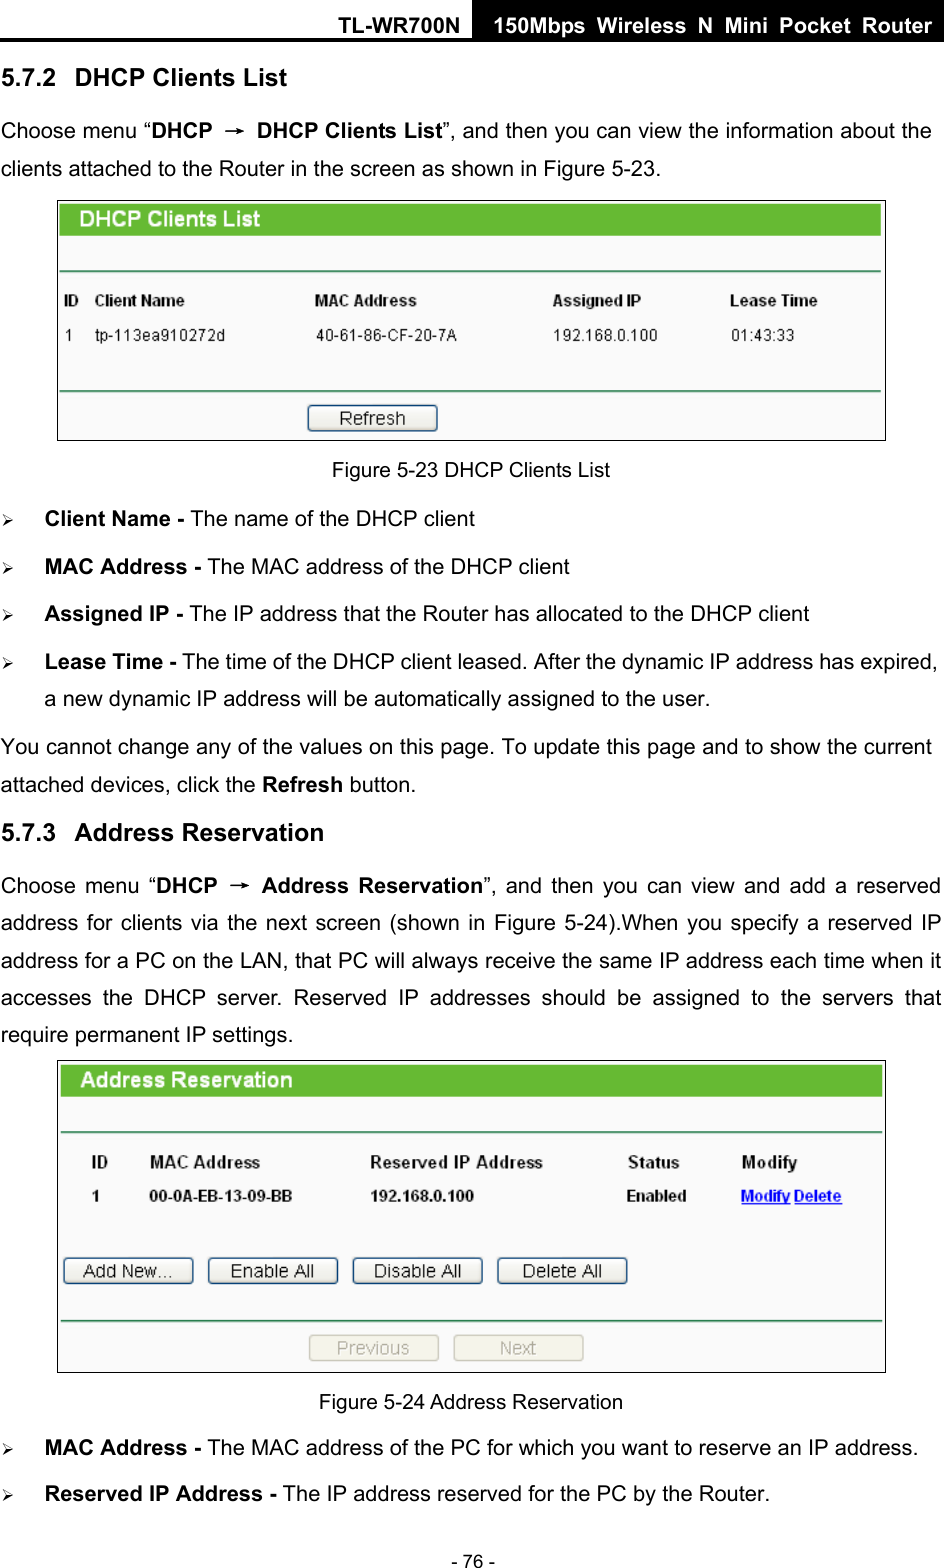 TL-WR700N 150Mbps Wireless N Mini Pocket Router - 76 - 5.7.2  DHCP Clients List Choose menu “DHCP  →  DHCP Clients List”, and then you can view the information about the clients attached to the Router in the screen as shown in Figure 5-23.  Figure 5-23 DHCP Clients List ¾ Client Name - The name of the DHCP client   ¾ MAC Address - The MAC address of the DHCP client   ¾ Assigned IP - The IP address that the Router has allocated to the DHCP client ¾ Lease Time - The time of the DHCP client leased. After the dynamic IP address has expired, a new dynamic IP address will be automatically assigned to the user.     You cannot change any of the values on this page. To update this page and to show the current attached devices, click the Refresh button. 5.7.3  Address Reservation Choose menu “DHCP  → Address Reservation”, and then you can view and add a reserved address for clients via the next screen (shown in Figure 5-24).When you specify a reserved IP address for a PC on the LAN, that PC will always receive the same IP address each time when it accesses the DHCP server. Reserved IP addresses should be assigned to the servers that require permanent IP settings.    Figure 5-24 Address Reservation ¾ MAC Address - The MAC address of the PC for which you want to reserve an IP address. ¾ Reserved IP Address - The IP address reserved for the PC by the Router. 